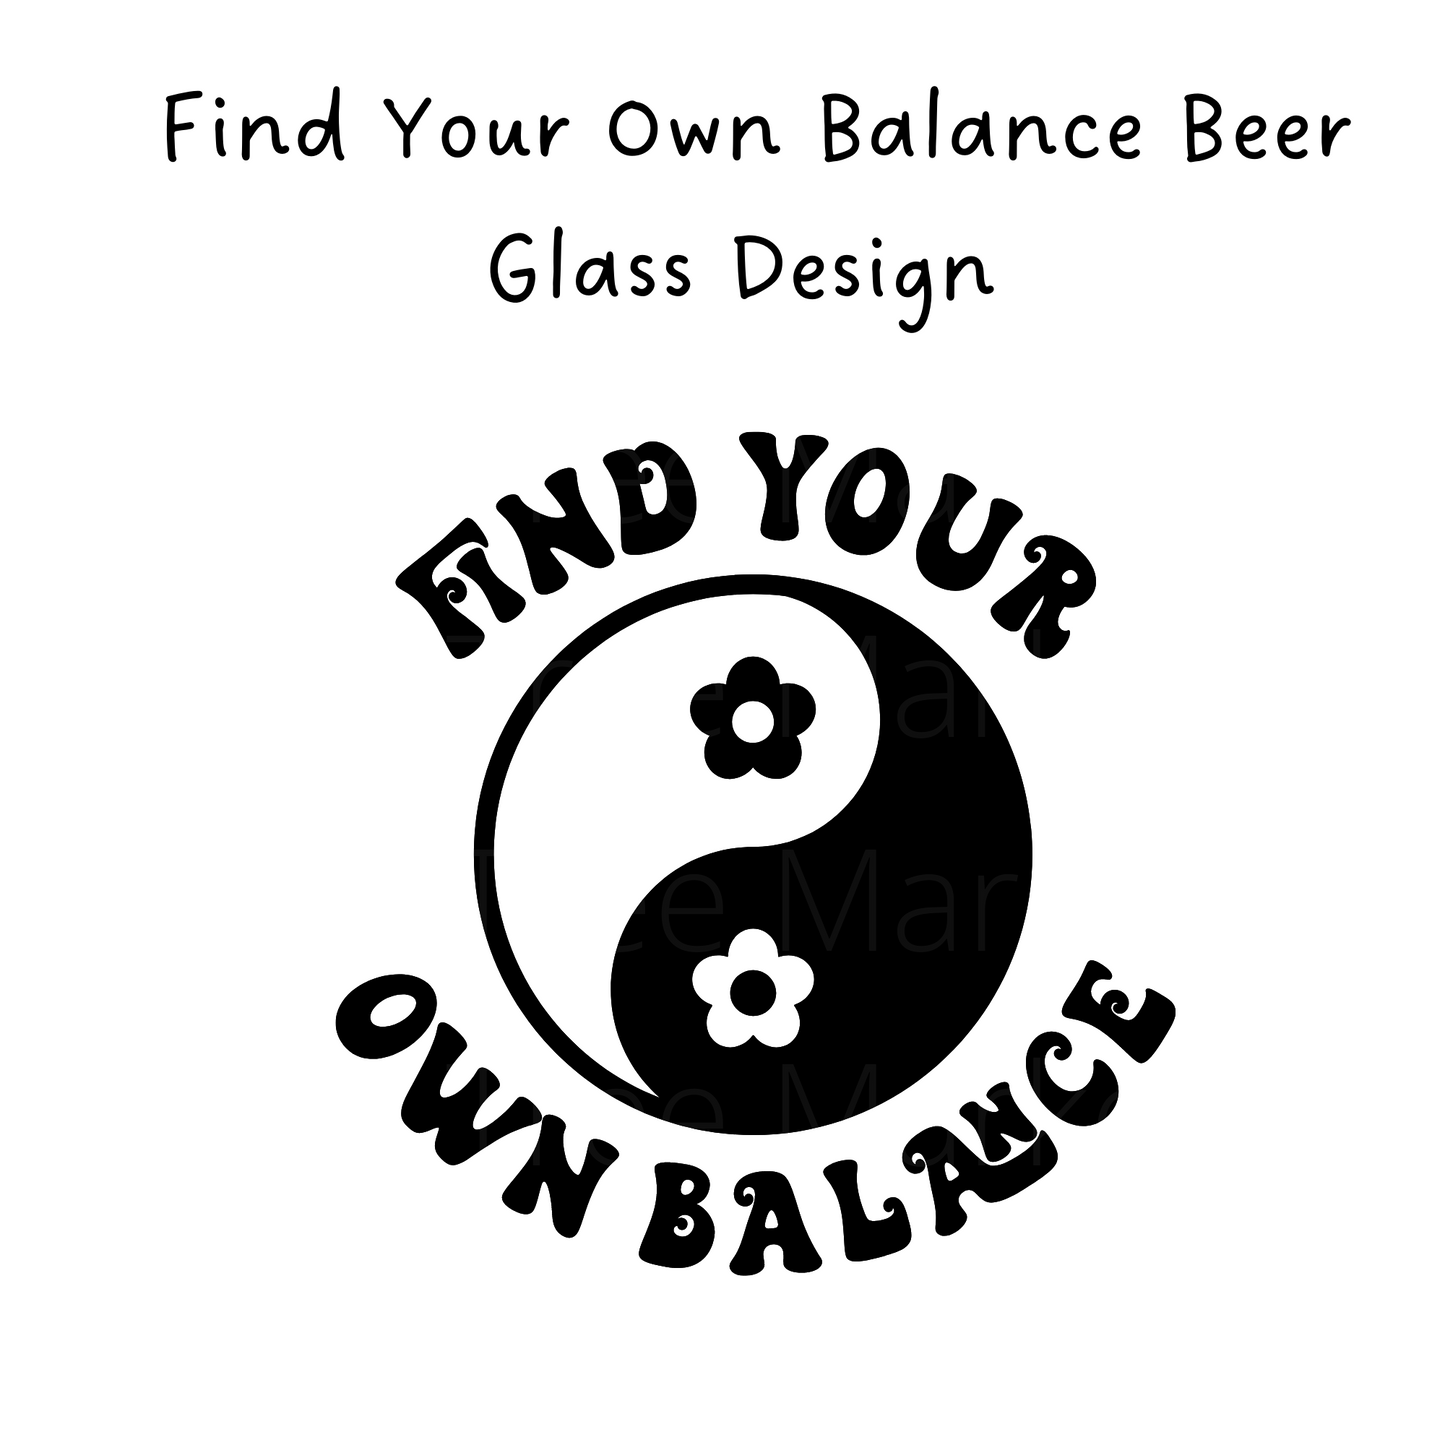 Find Your Own Balance 16 Oz Libbey Beer Glass Wrap